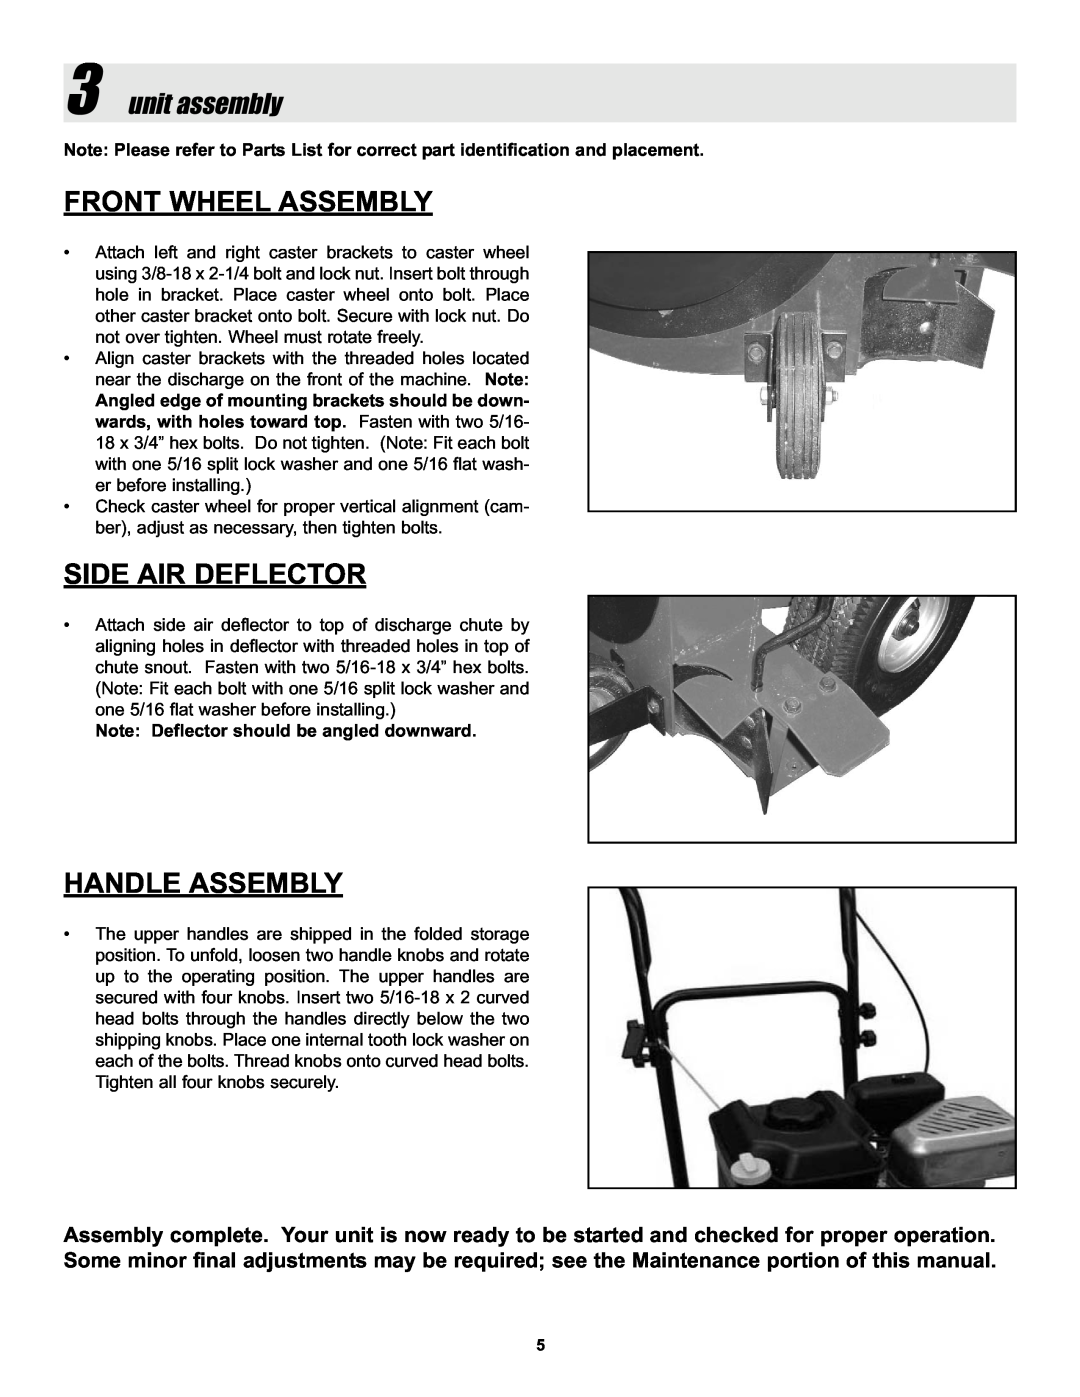 Snapper LBC6152BV manual Front Wheel Assembly, Side Air Deflector, Handle Assembly, 3unit assembly 